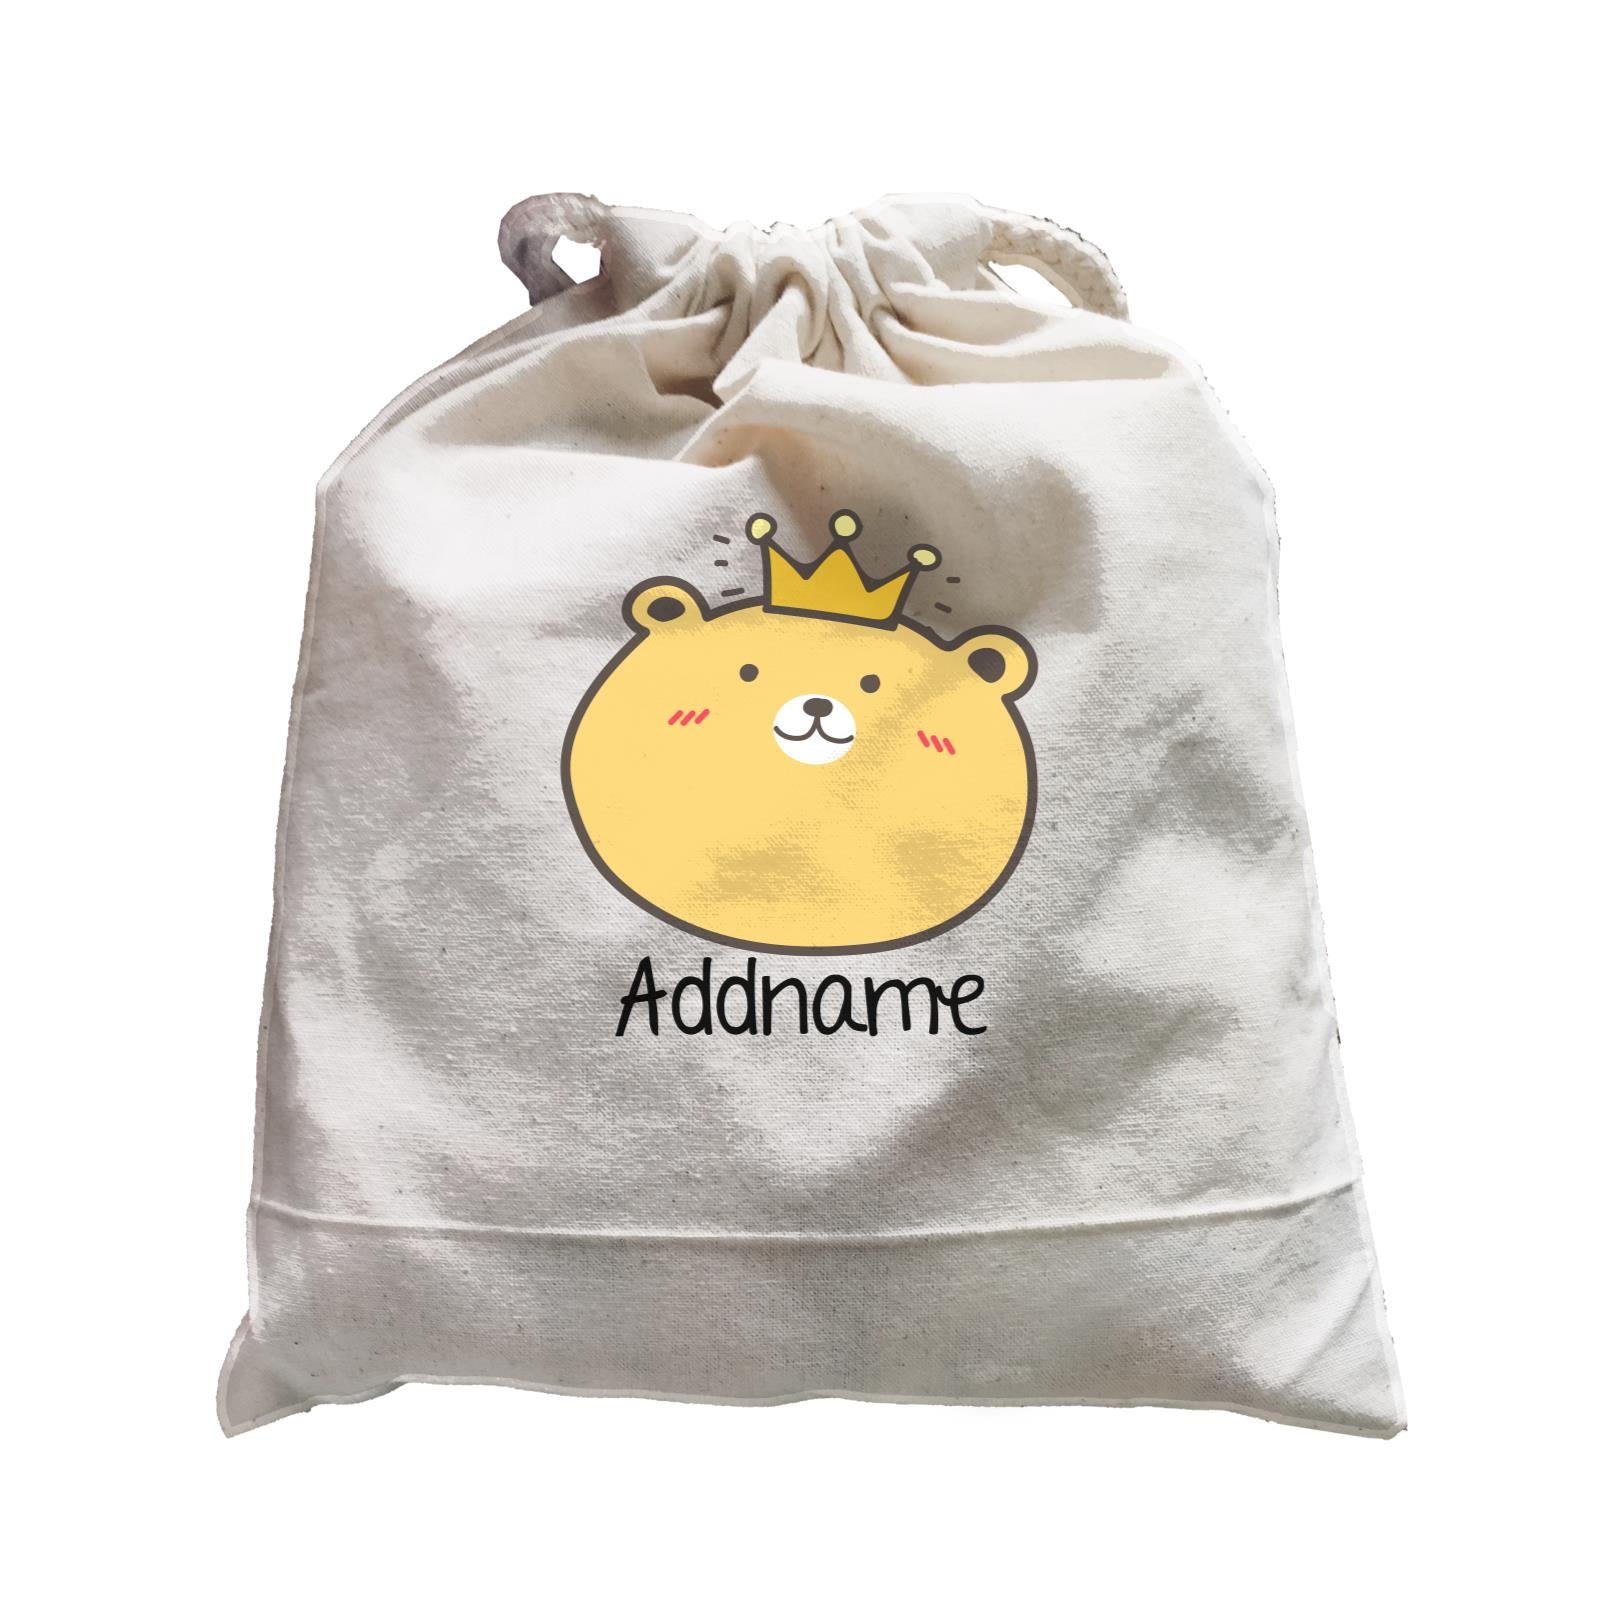 Cute Animals And Friends Series Cute Yellow Bear With Crown Addname Satchel